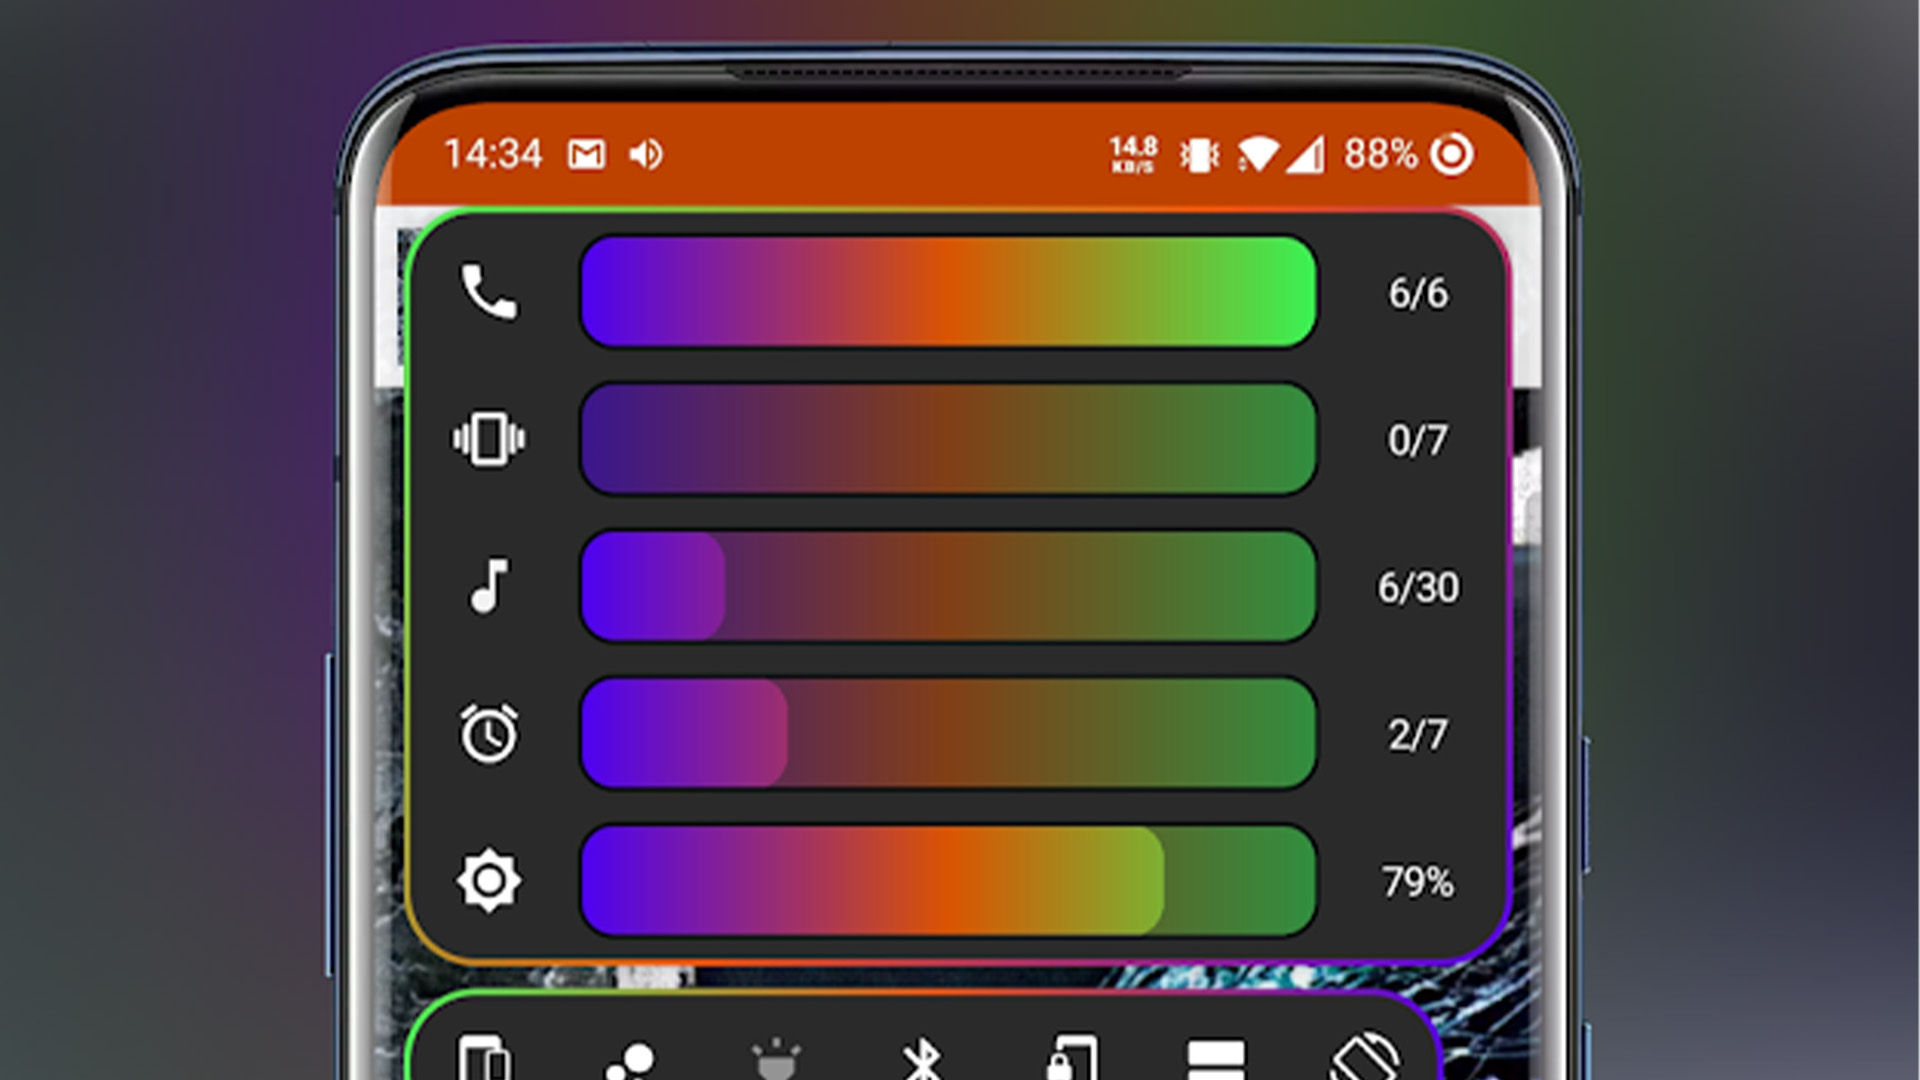 Volume Control Panel Pro best customization apps for Android